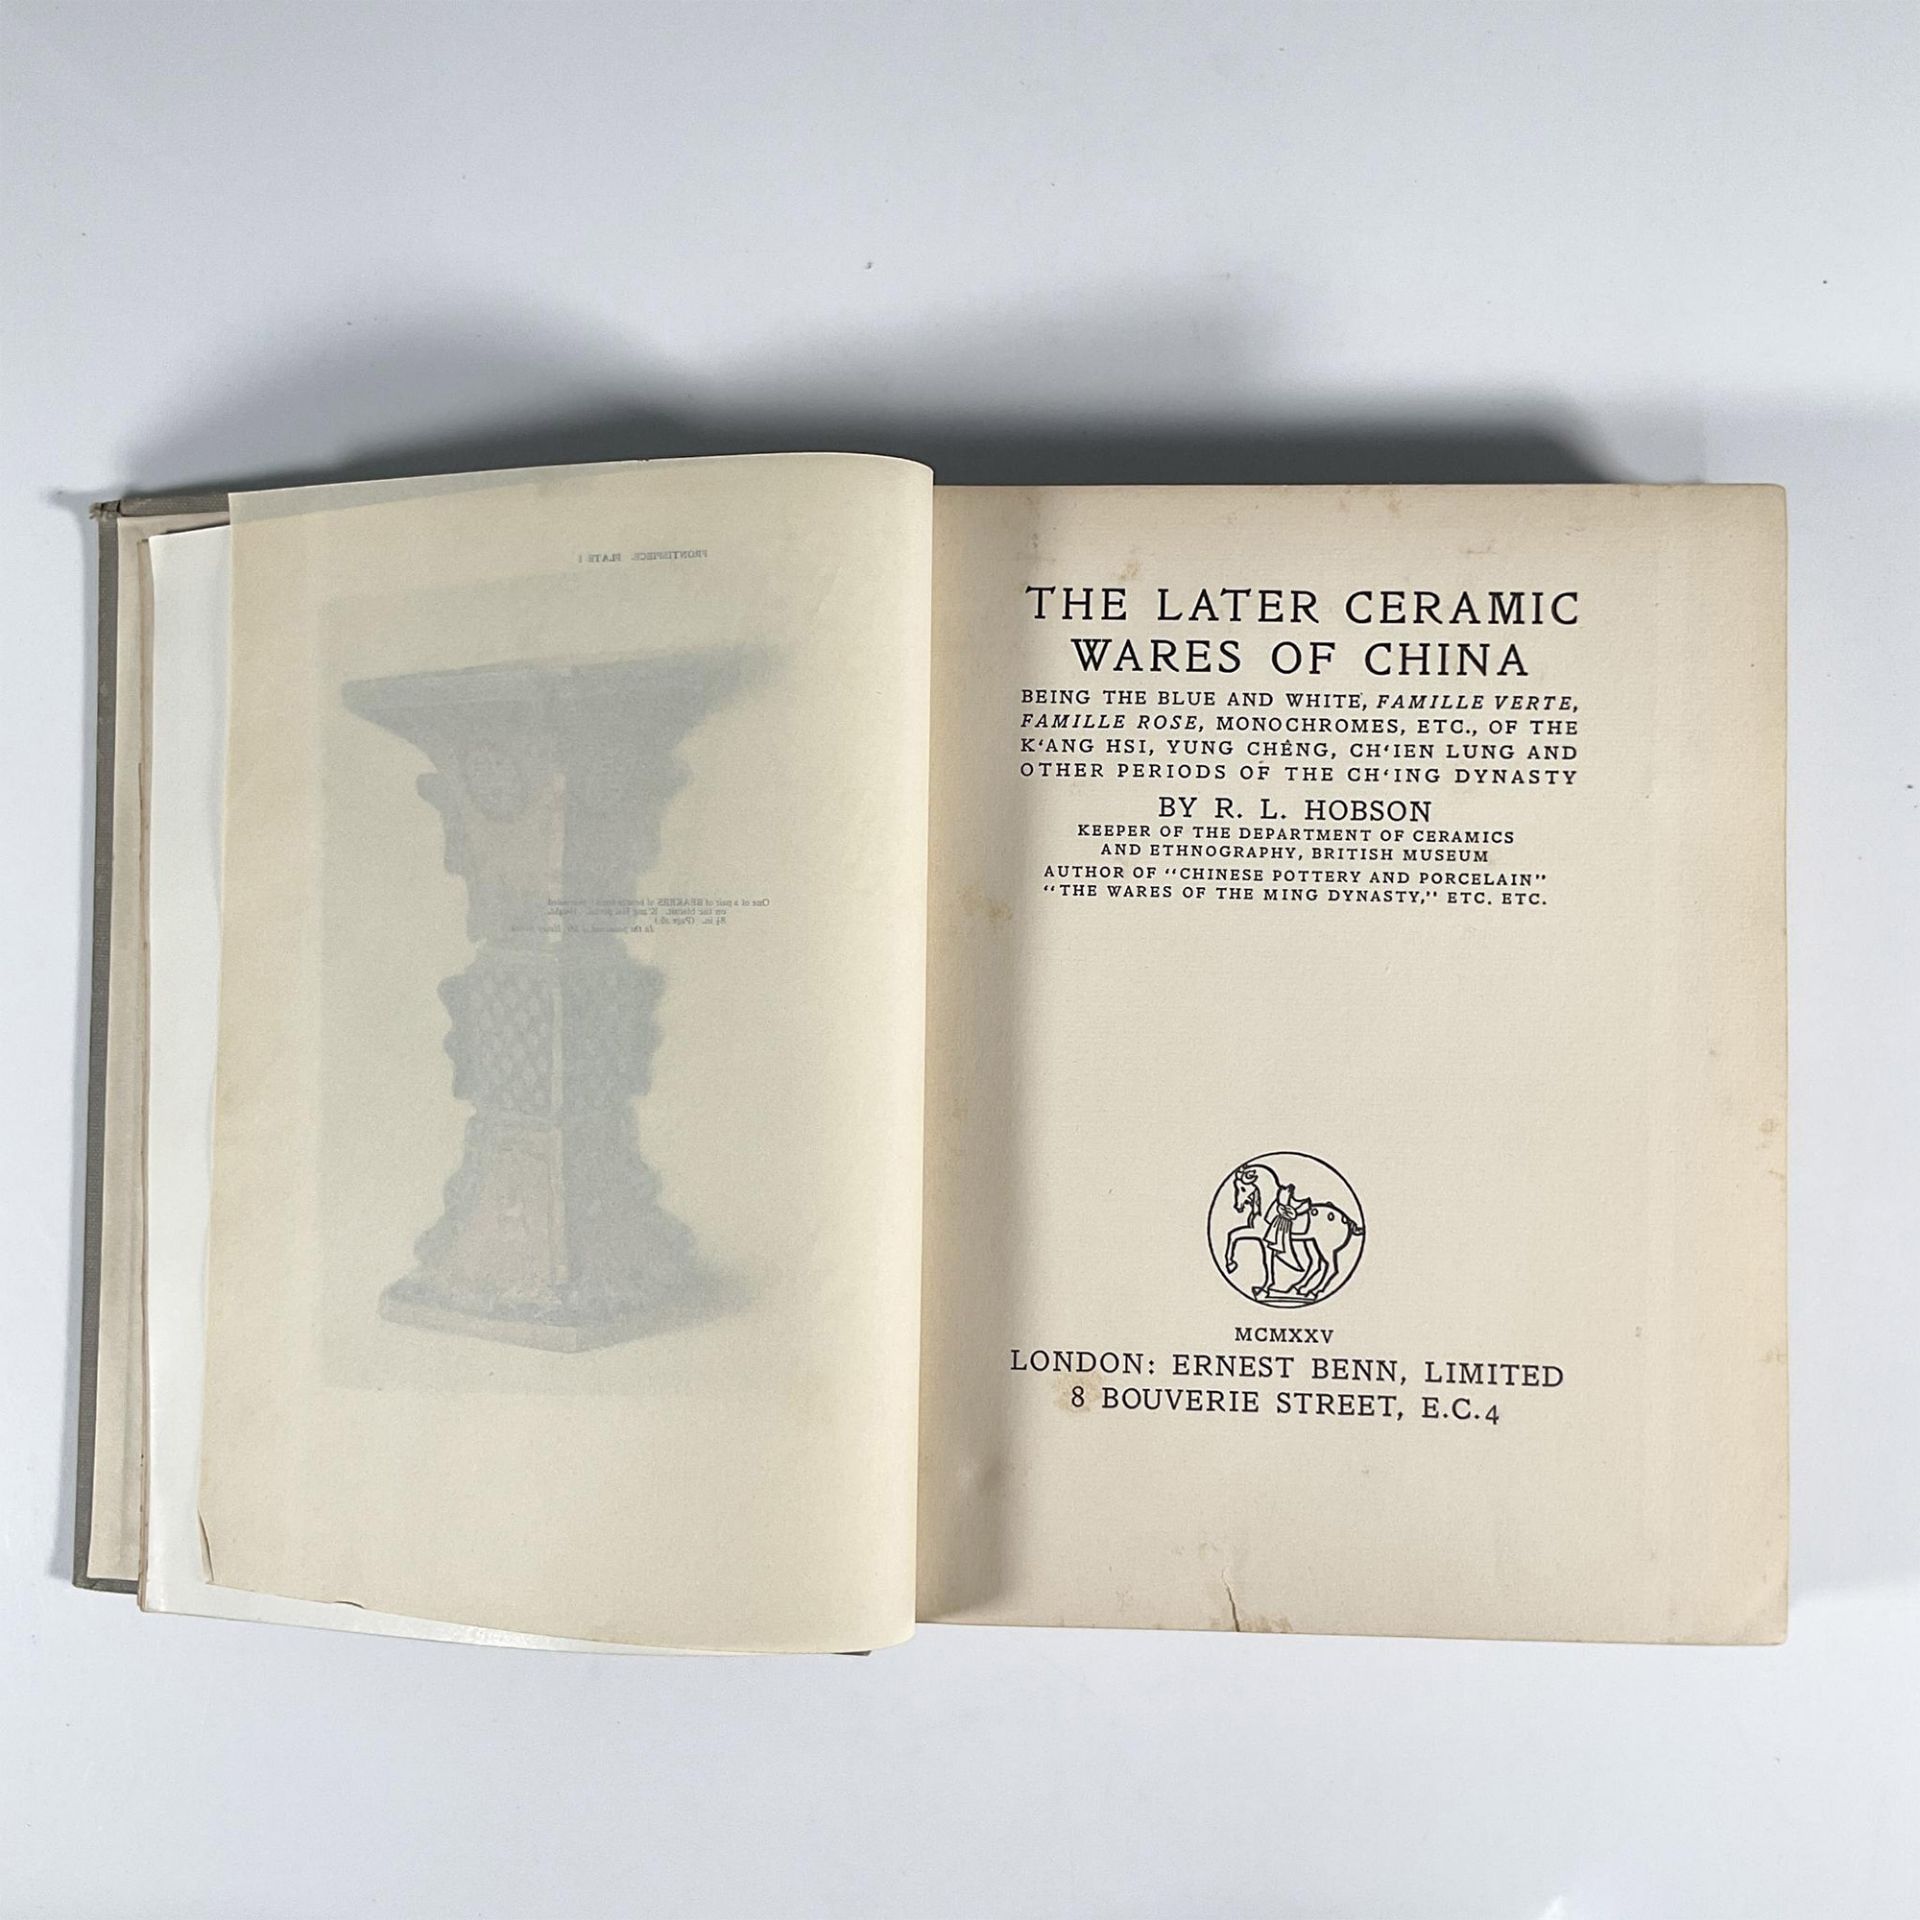 1st Edition, The Later Ceramic Ware of China, Book by Hobson - Image 3 of 3